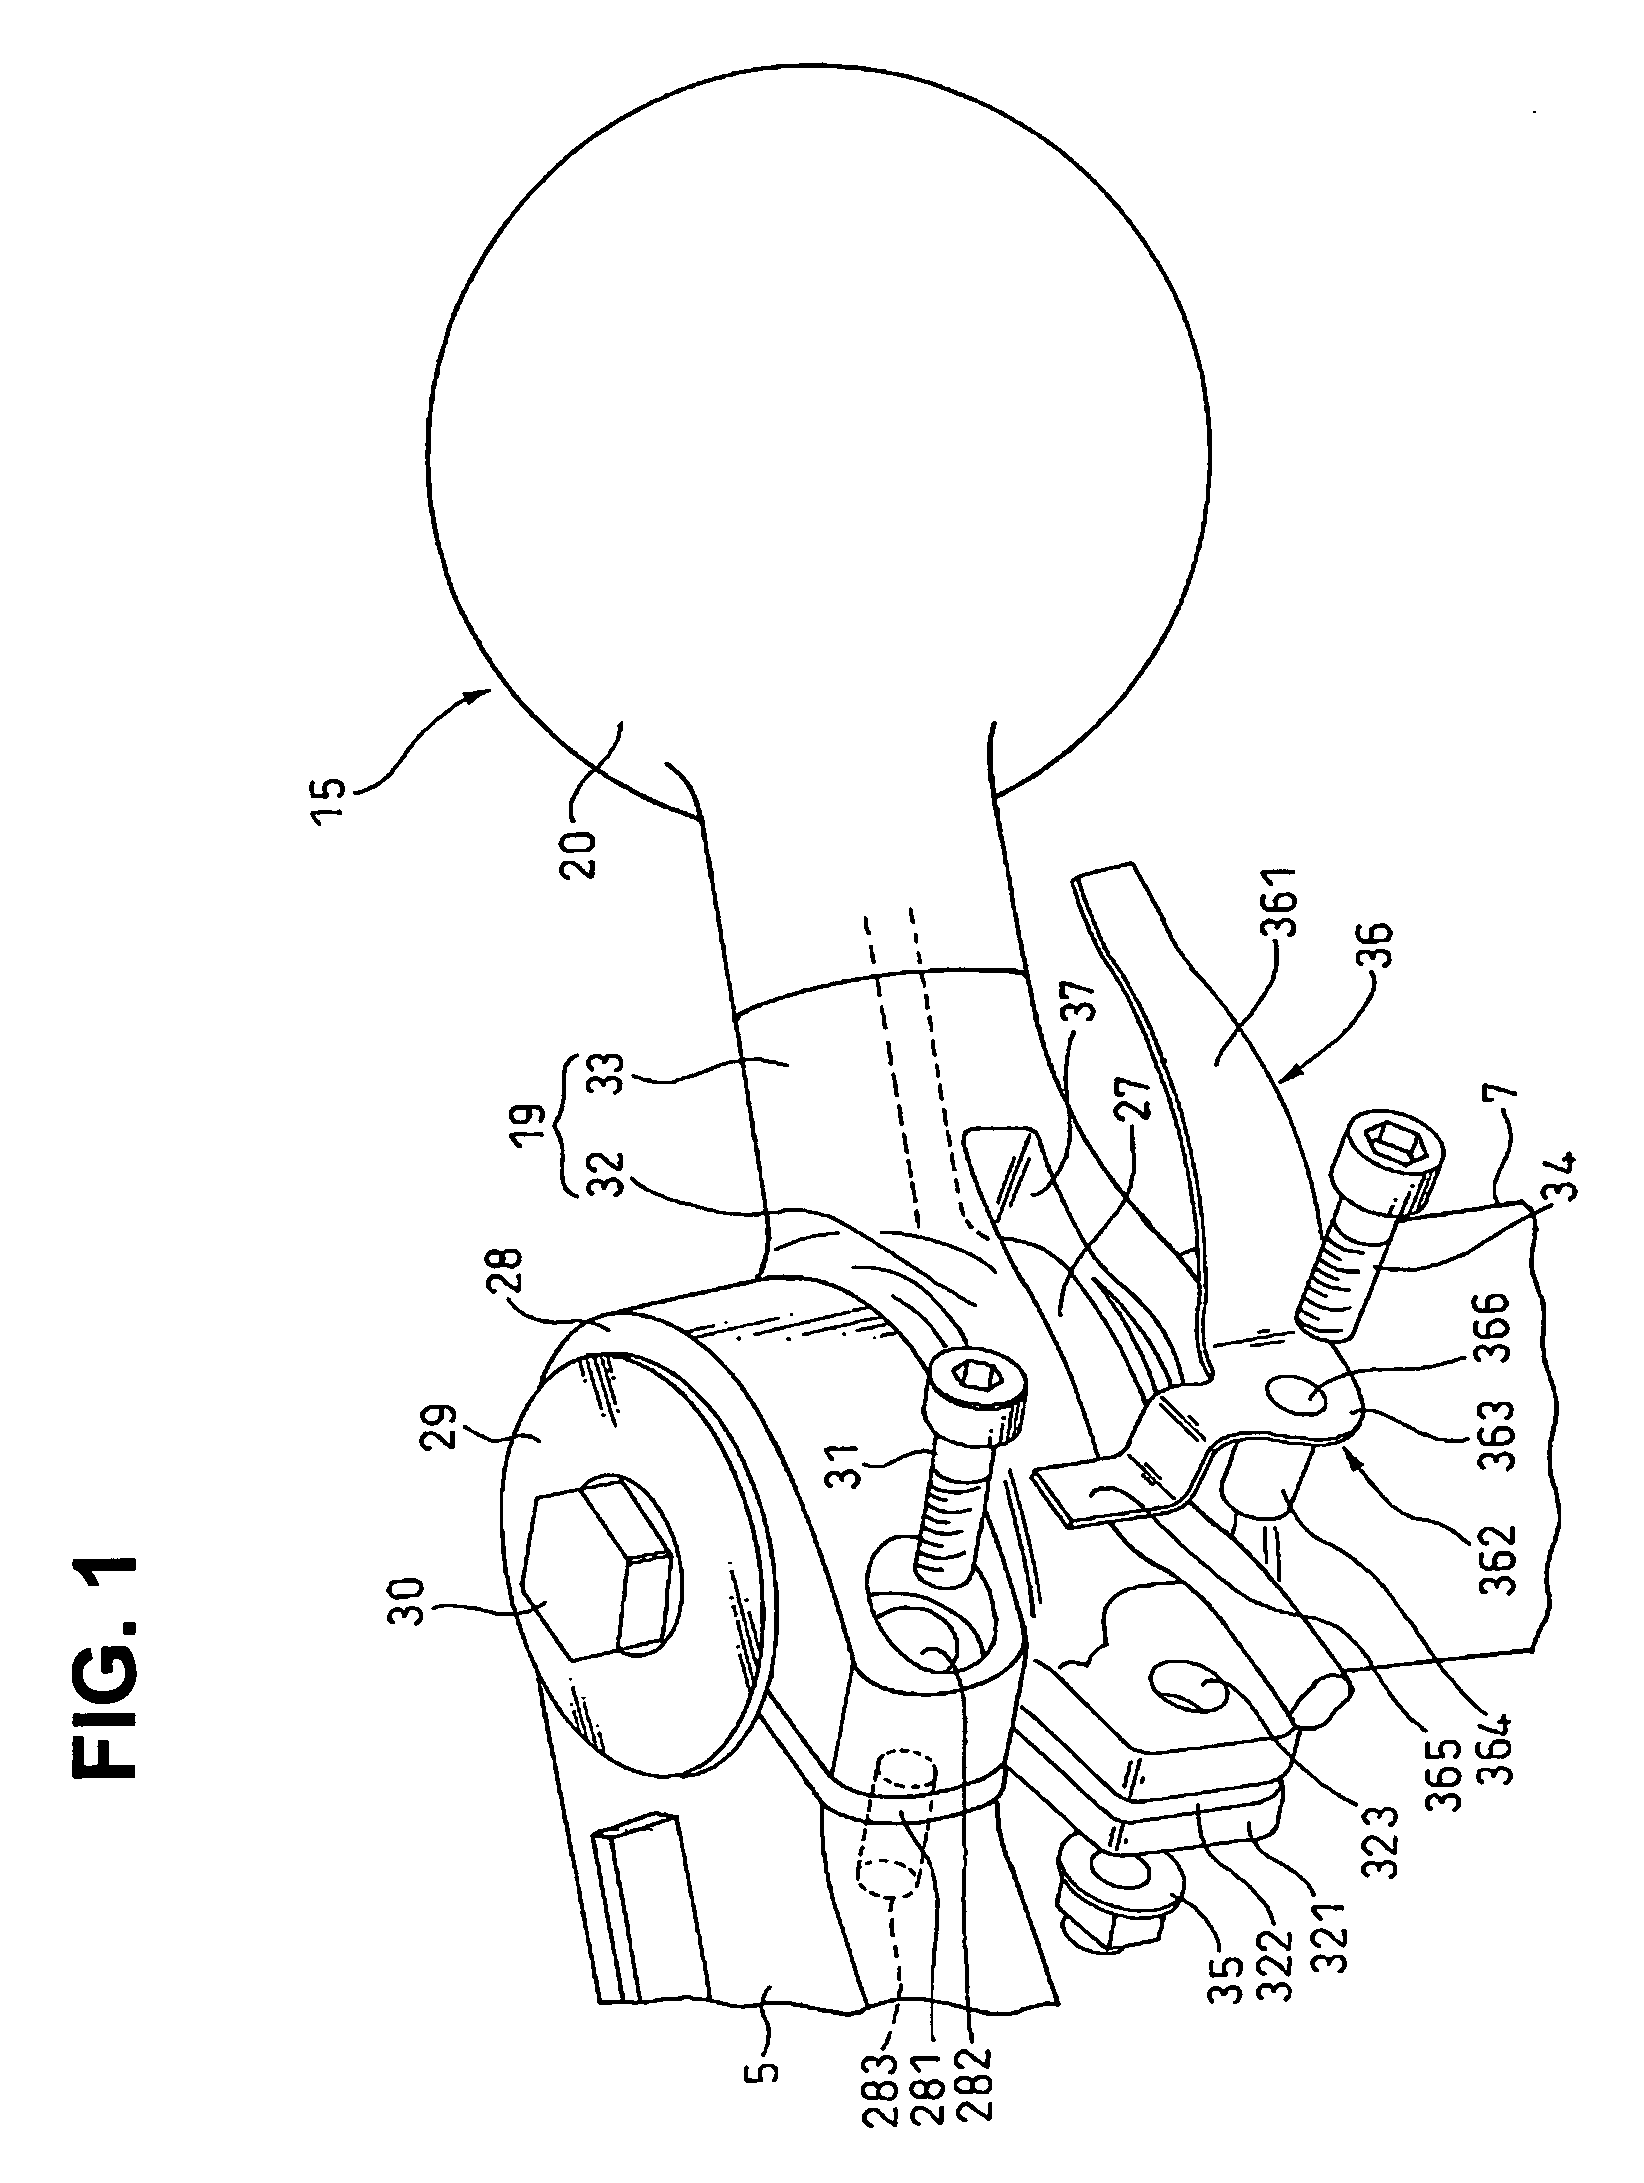 Turn signal indicator lamp apparatus for a motorcycle, and motorcycle including same